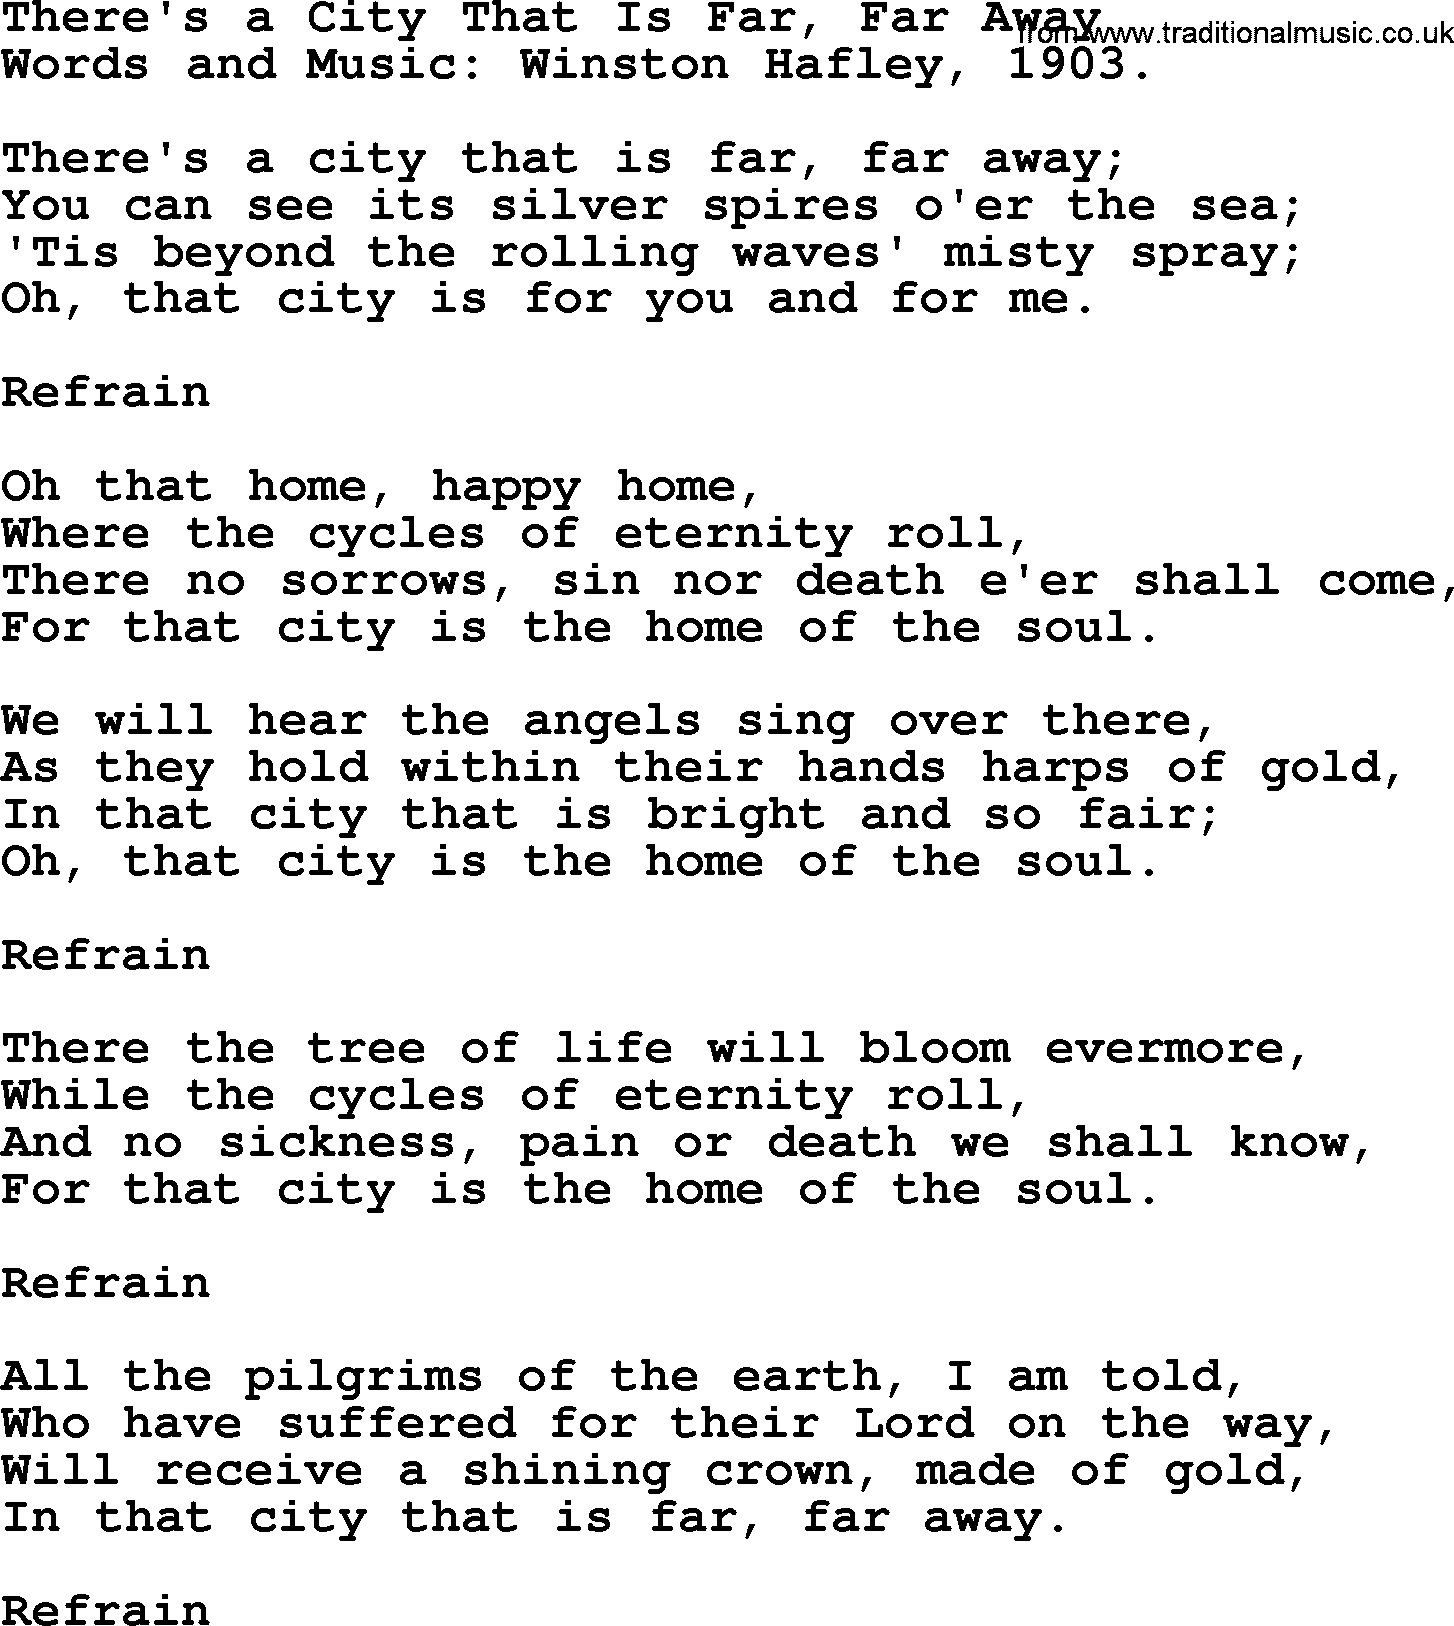 Songs and Hymns about Heaven: There's A City That Is Far, Far Away lyrics with PDF